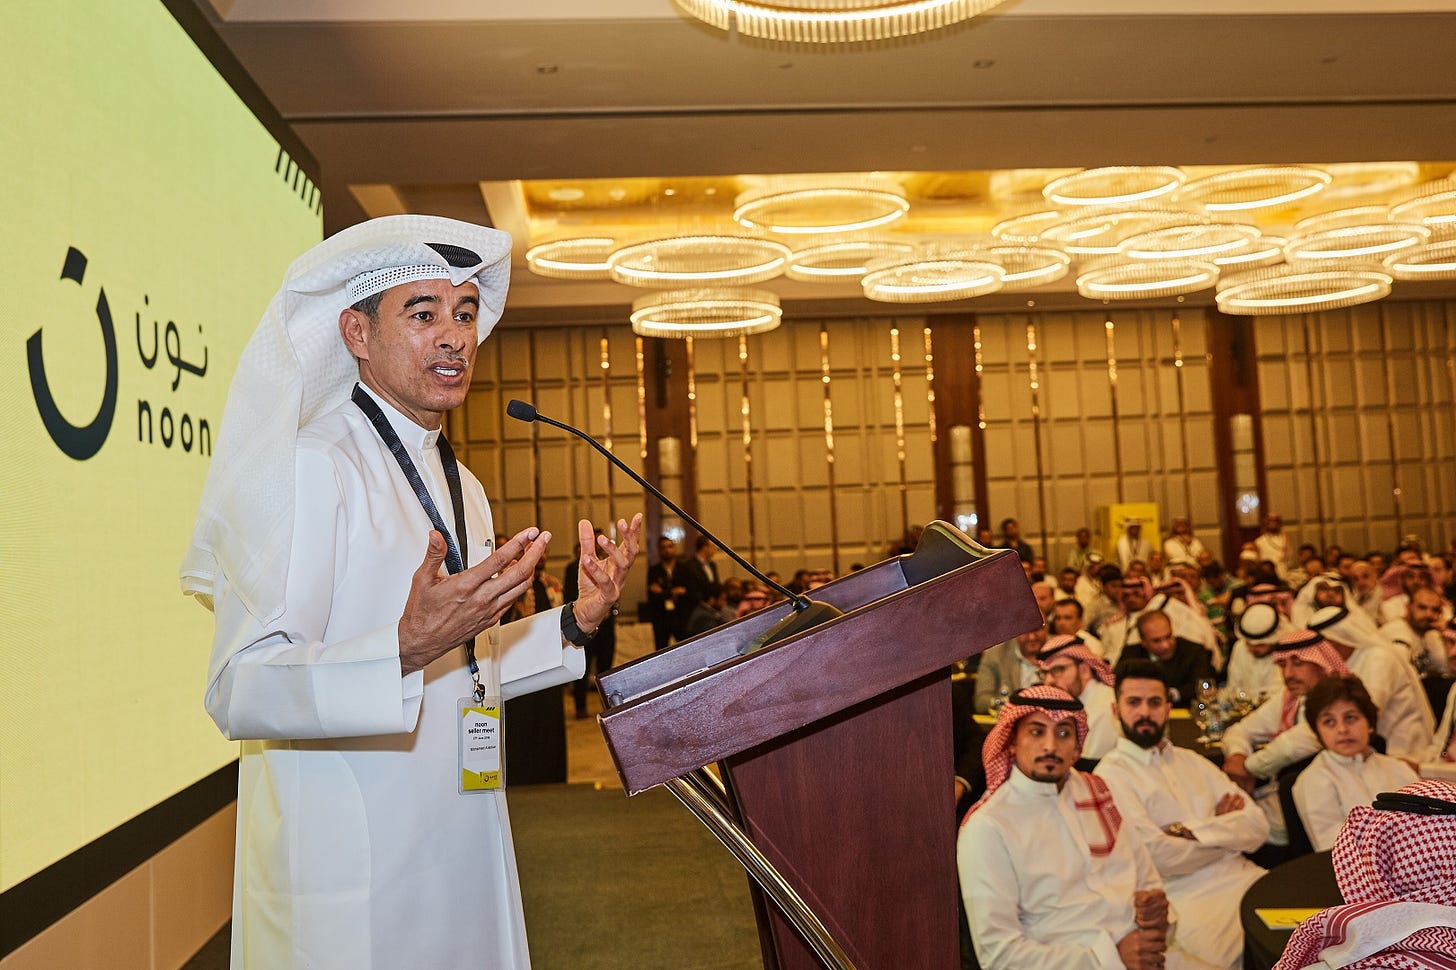 Mohamed Alabbar speaks at noon.com's first seller event in Riyadh -  Construction Business News Middle East